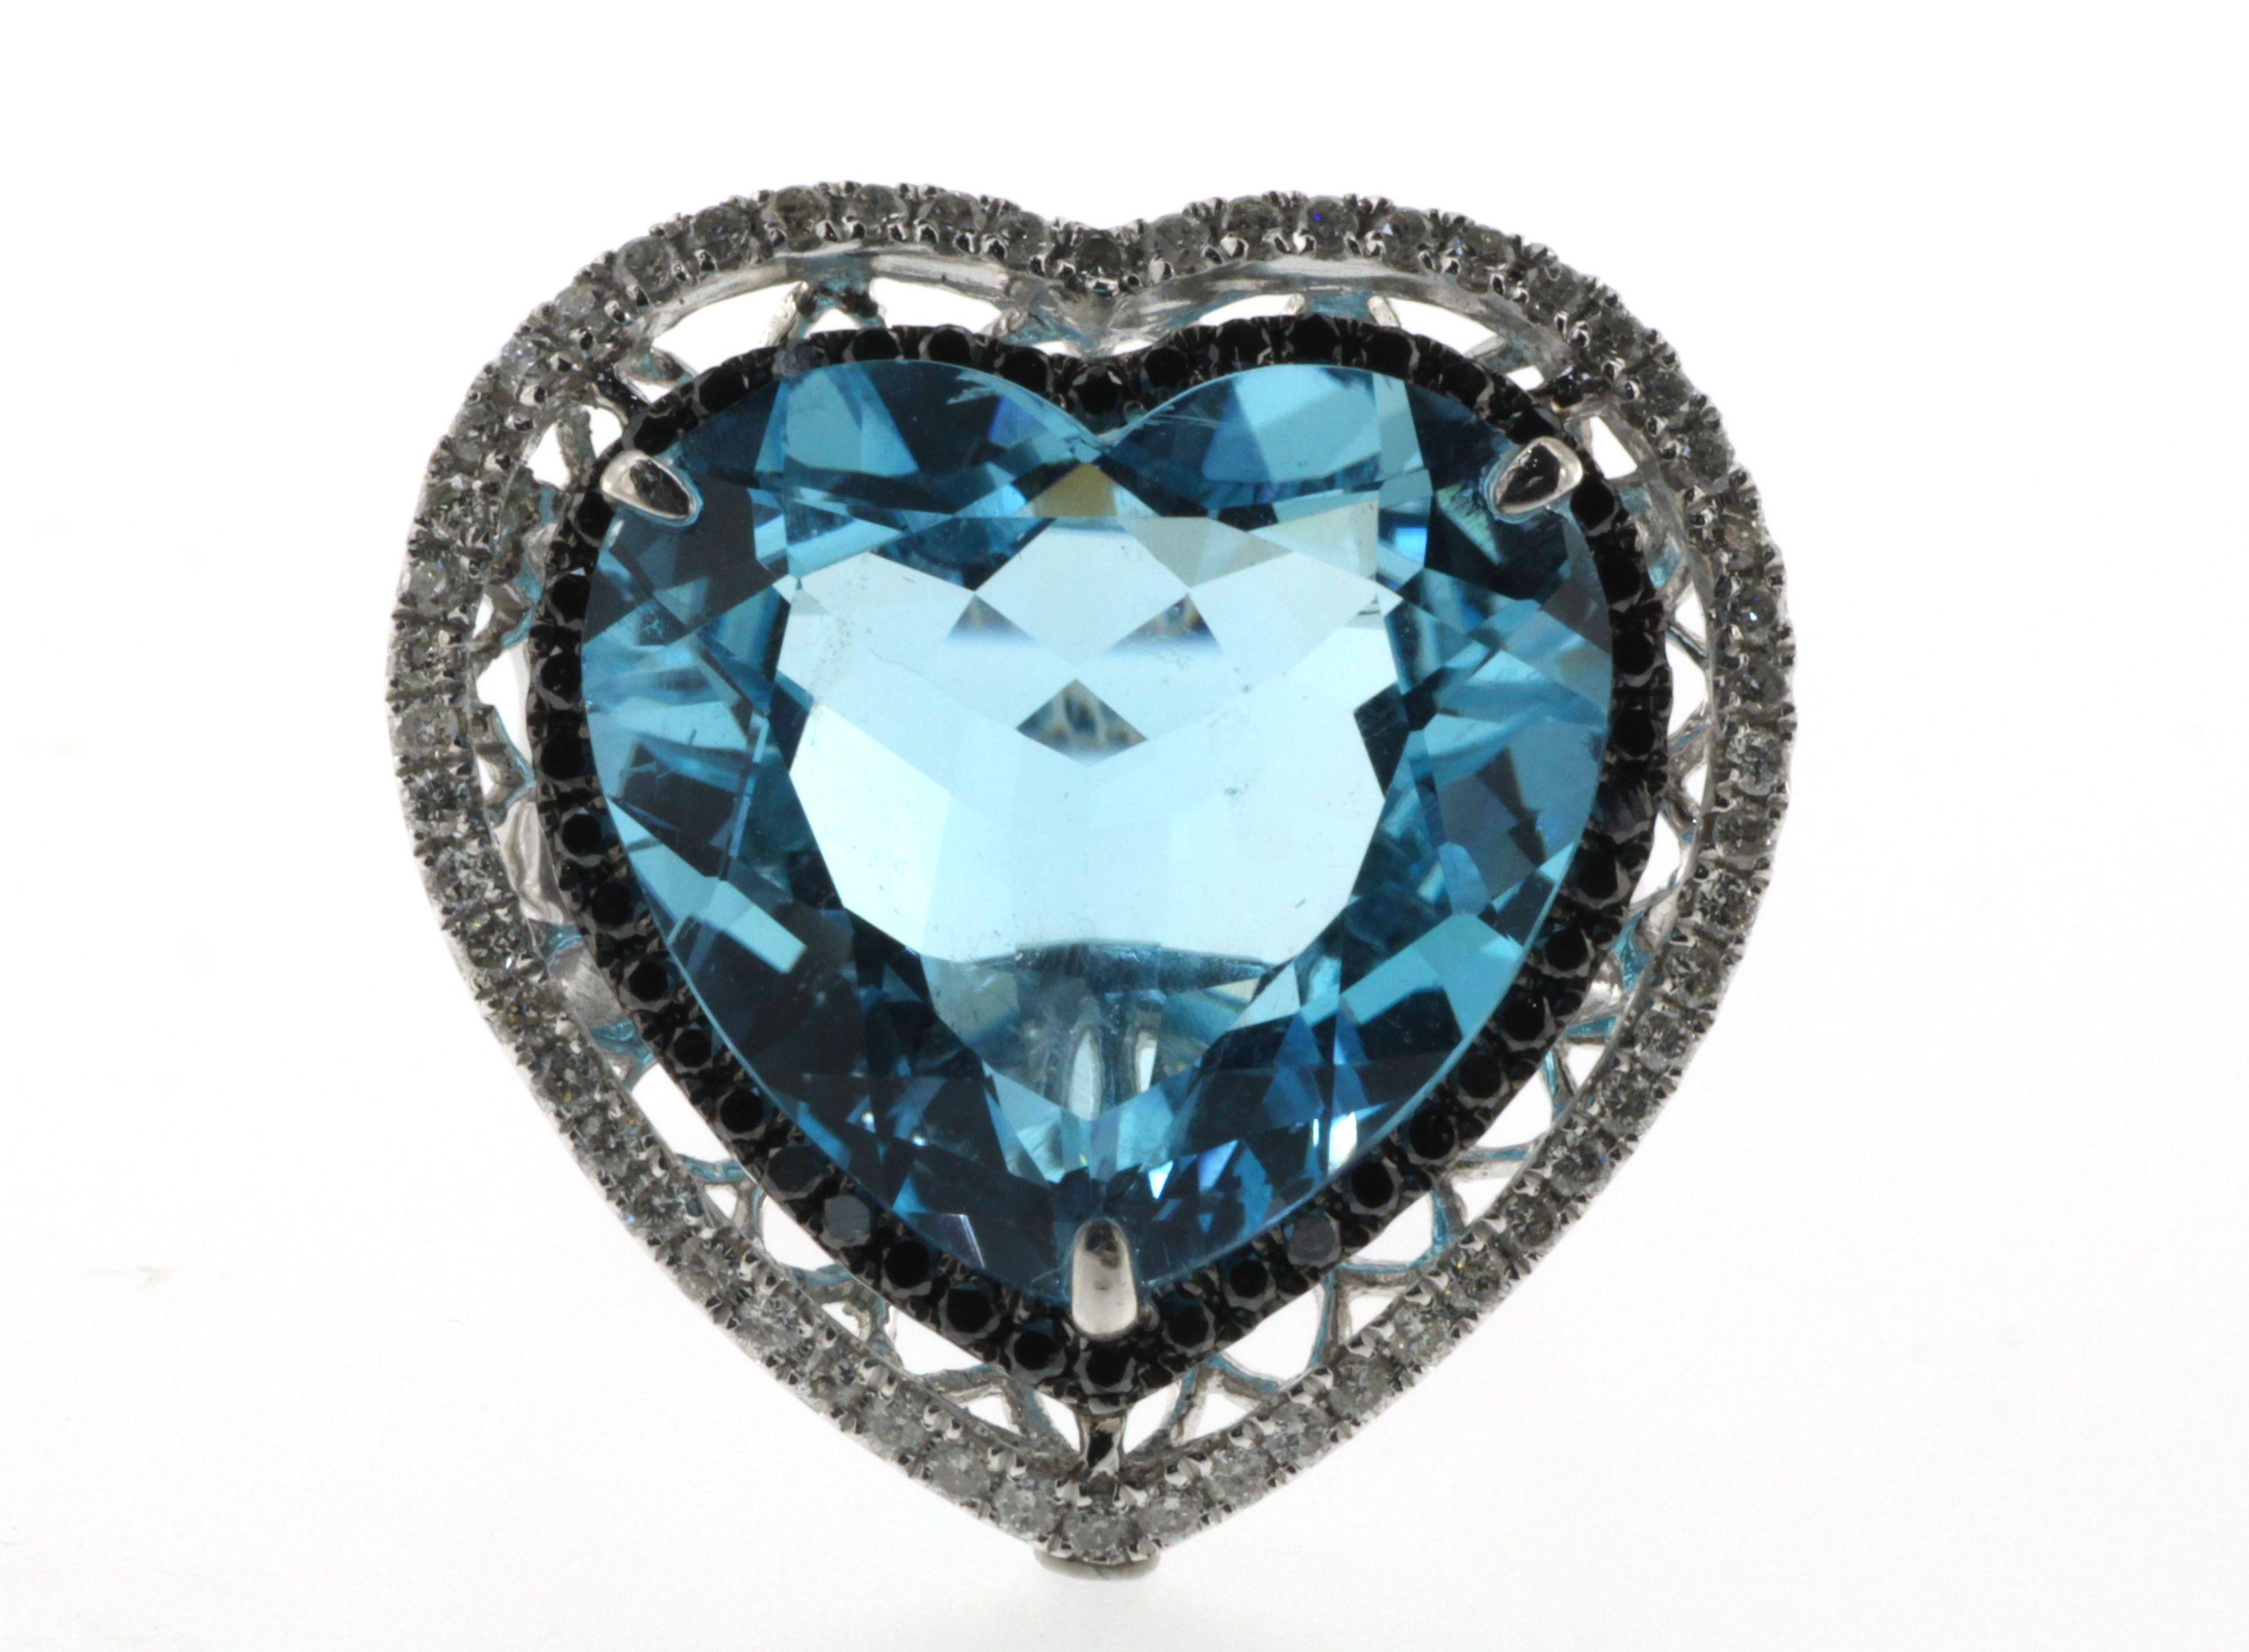 Introducing our exquisite Vintage Blue Topaz Heart Cut Diamond Cocktail Ring, a stunning piece that captures the essence of elegance and glamour. Crafted in 18 karat white gold and rhodium black gold, this ring is a true testament to luxurious